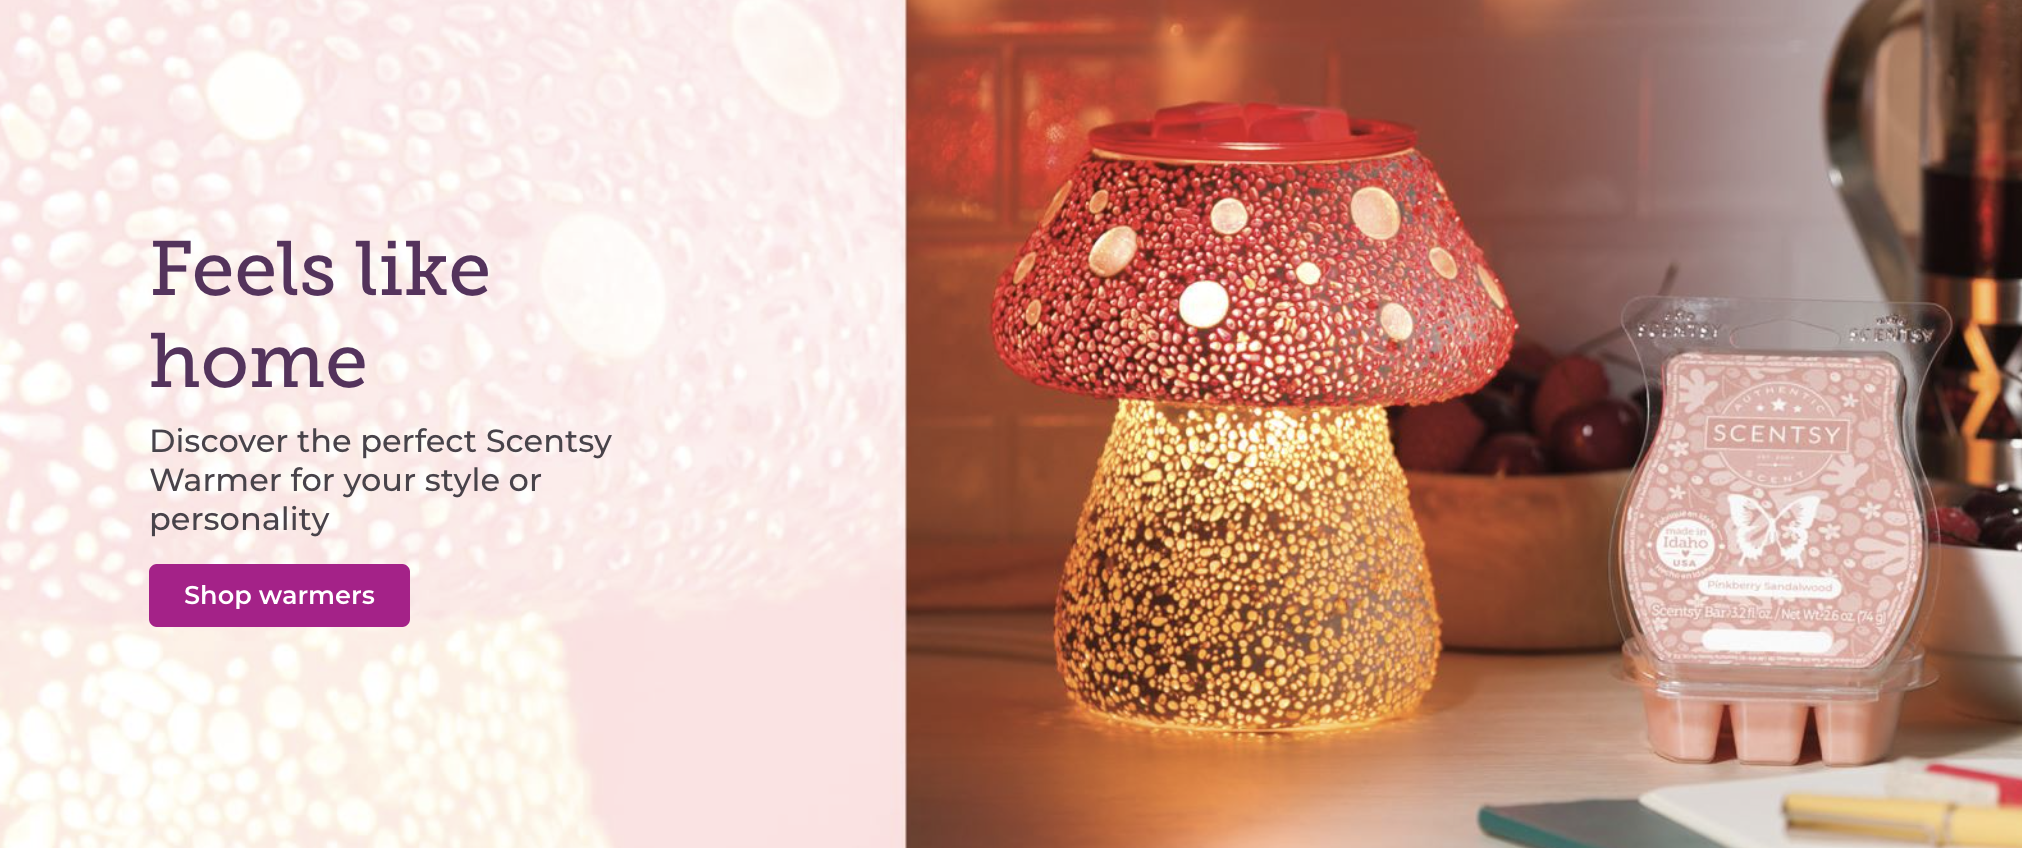 discover new Scentsy warmers